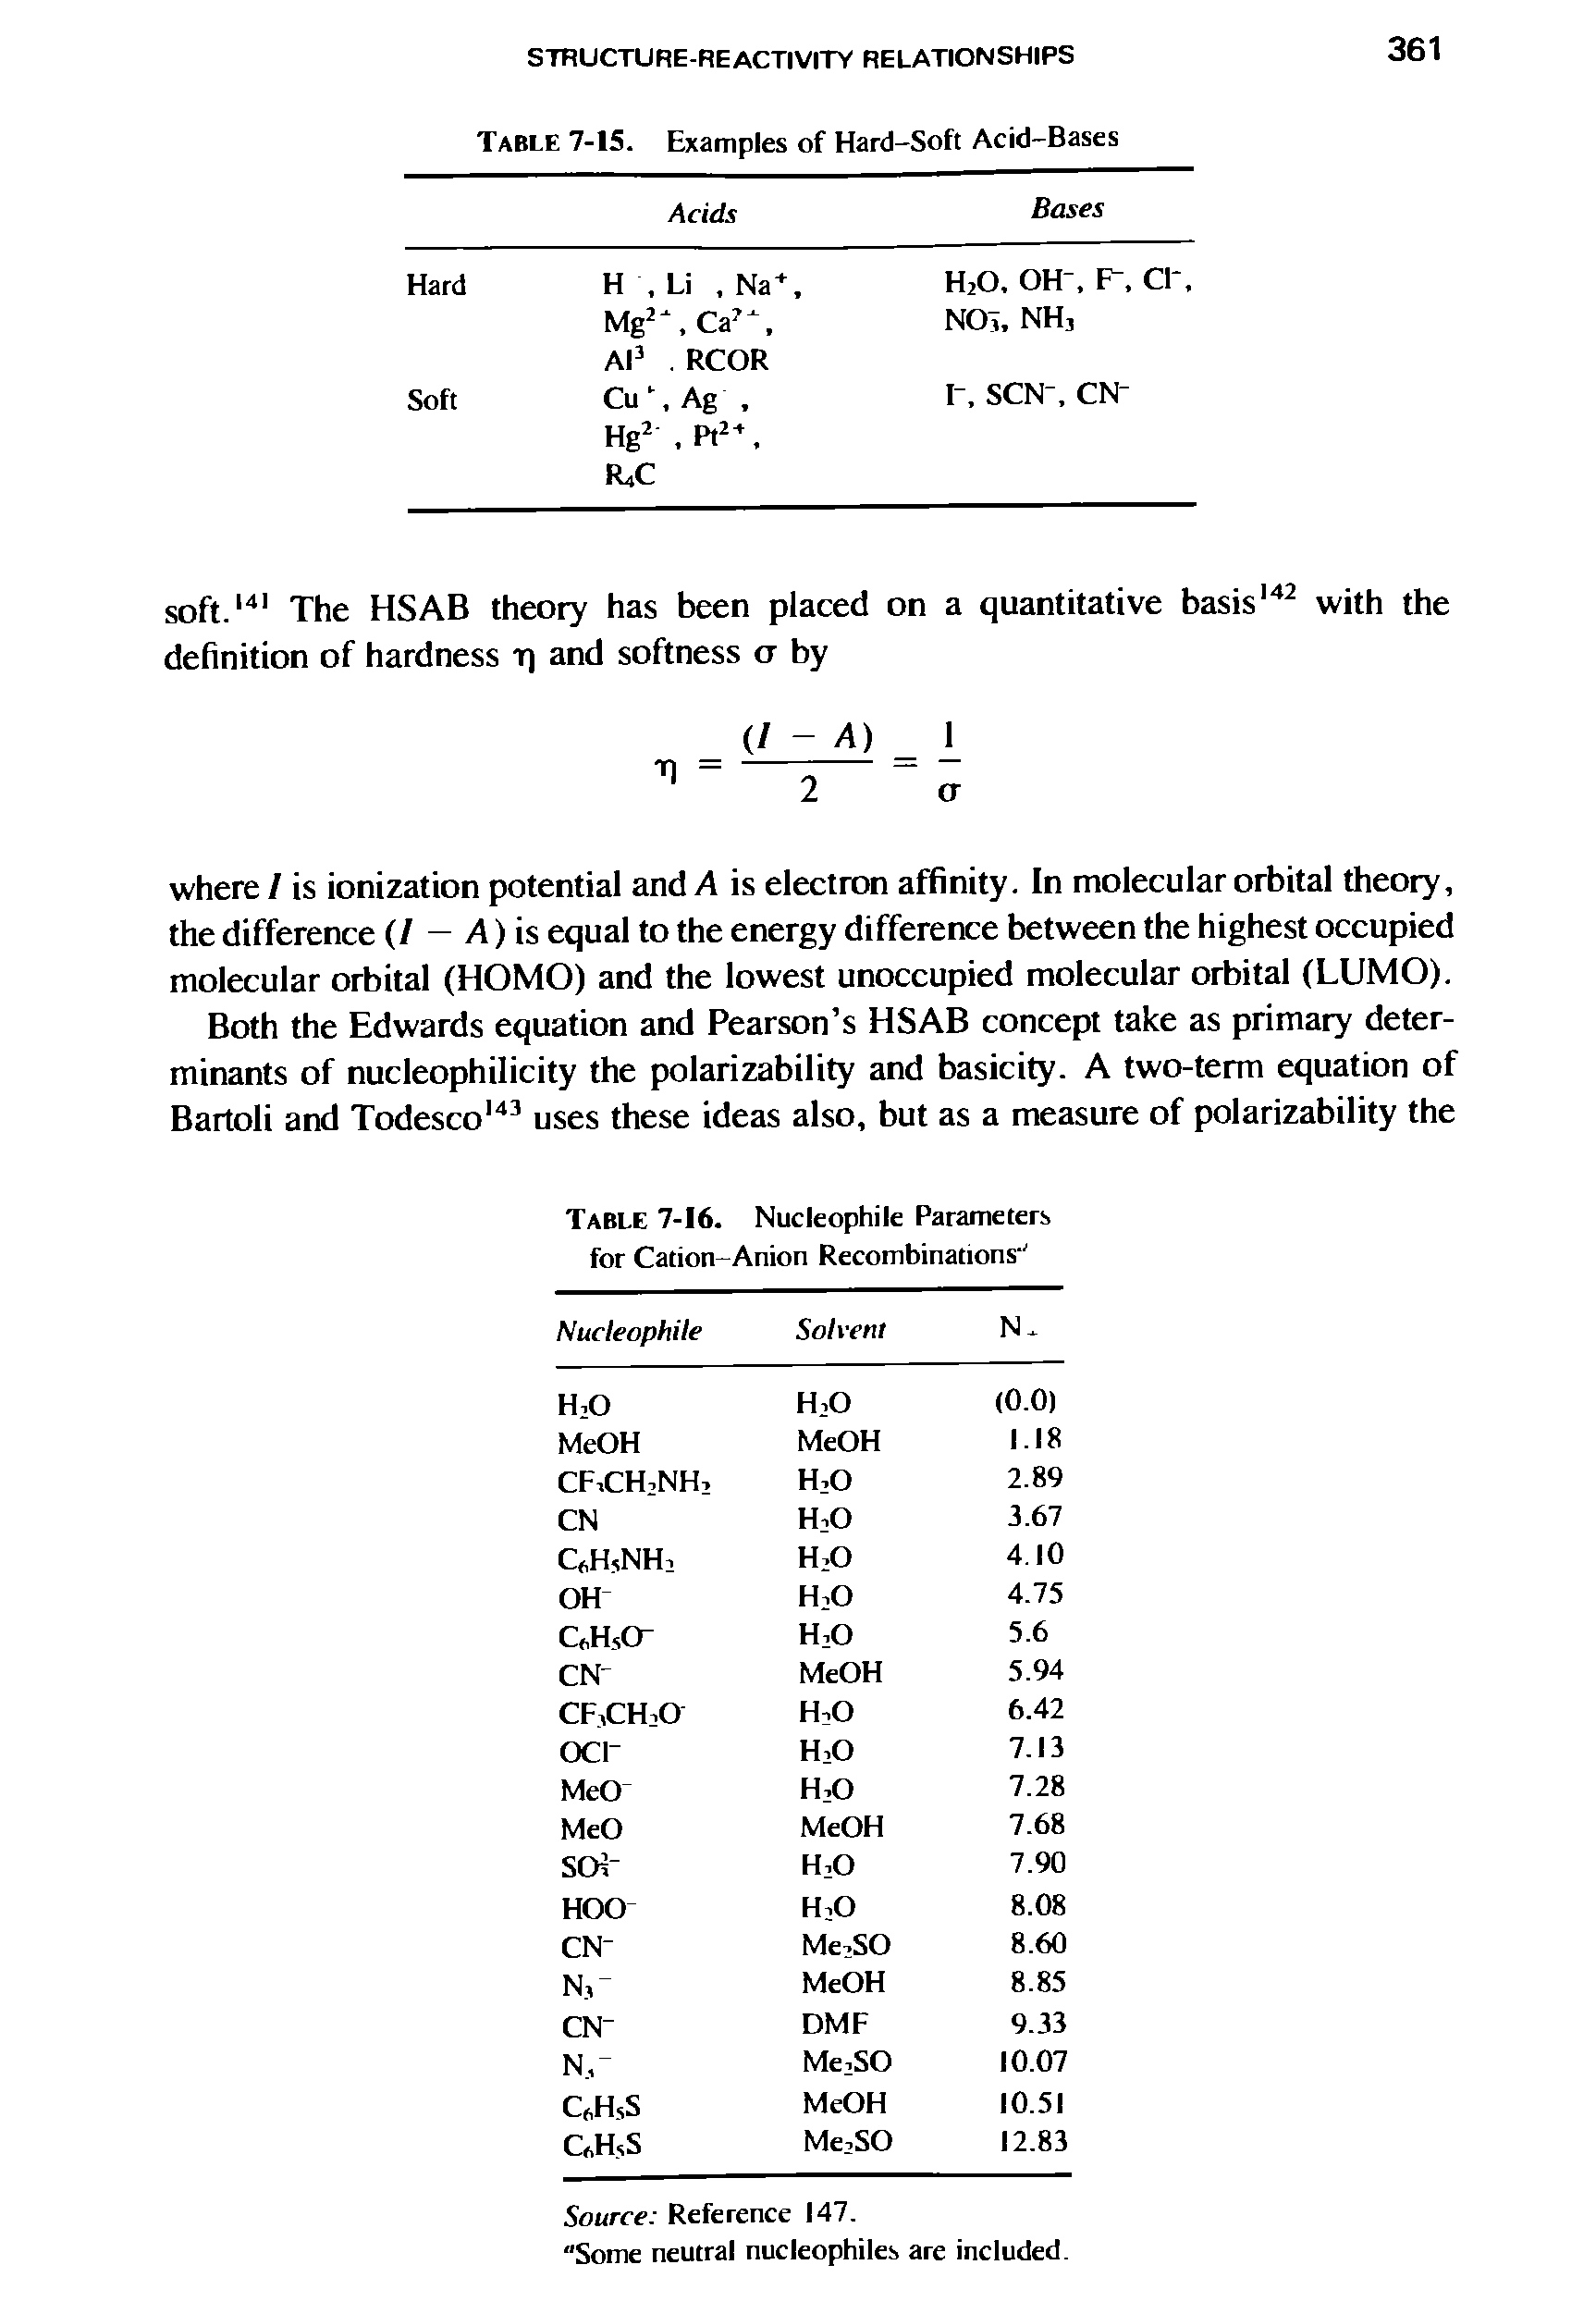 Table 7-16. Nucleophile Parameters for Cation-Anion Recombinations ...